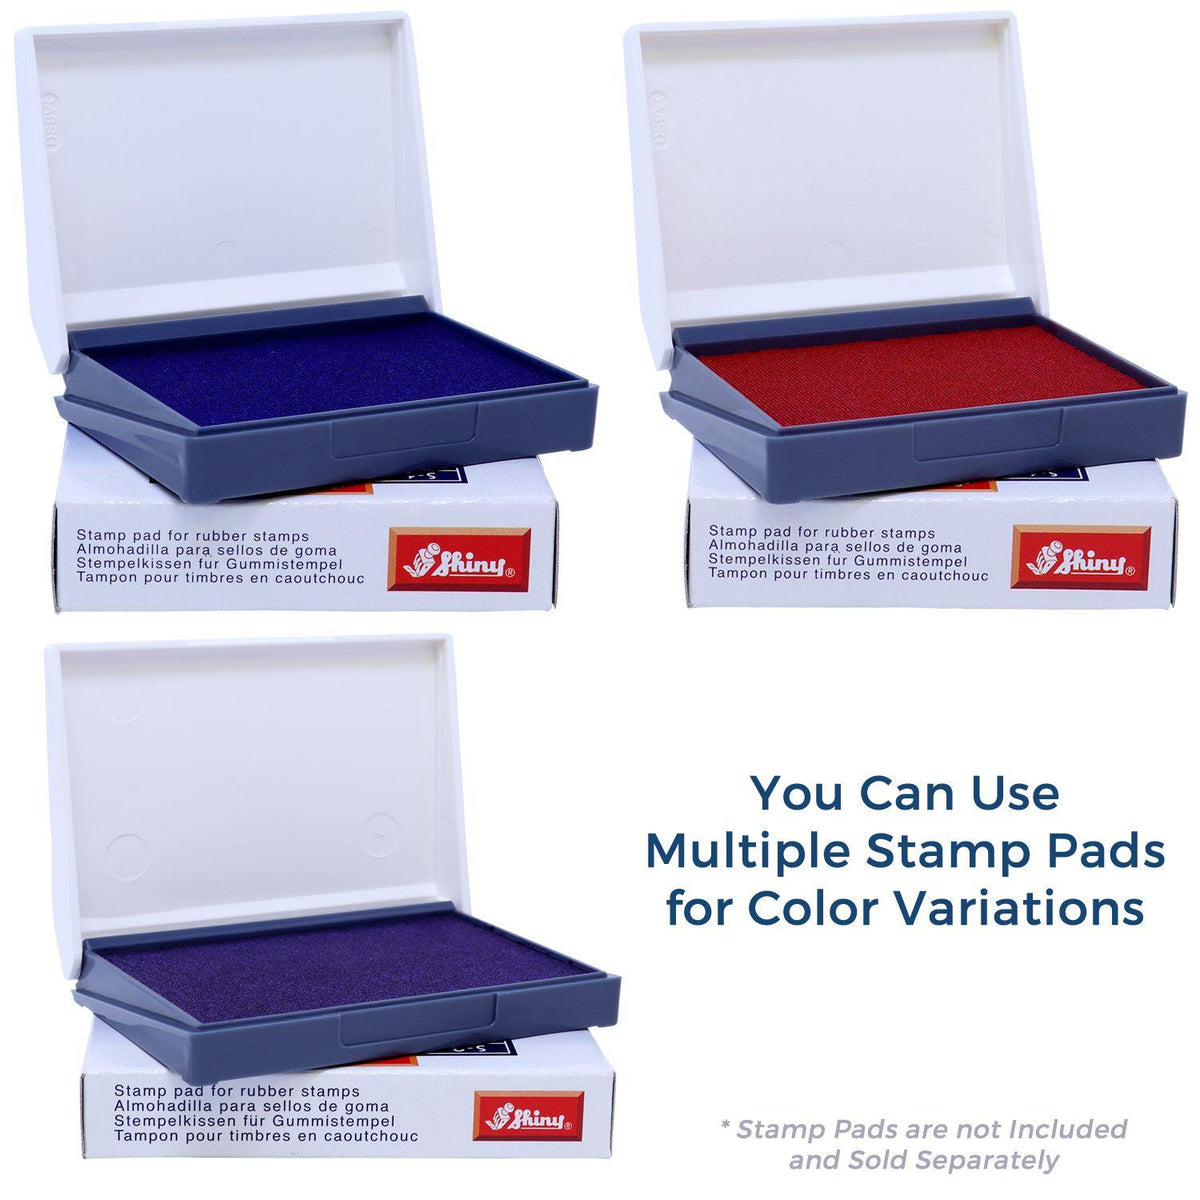 Stamp Pads for Balanced Rubber Stamp Available